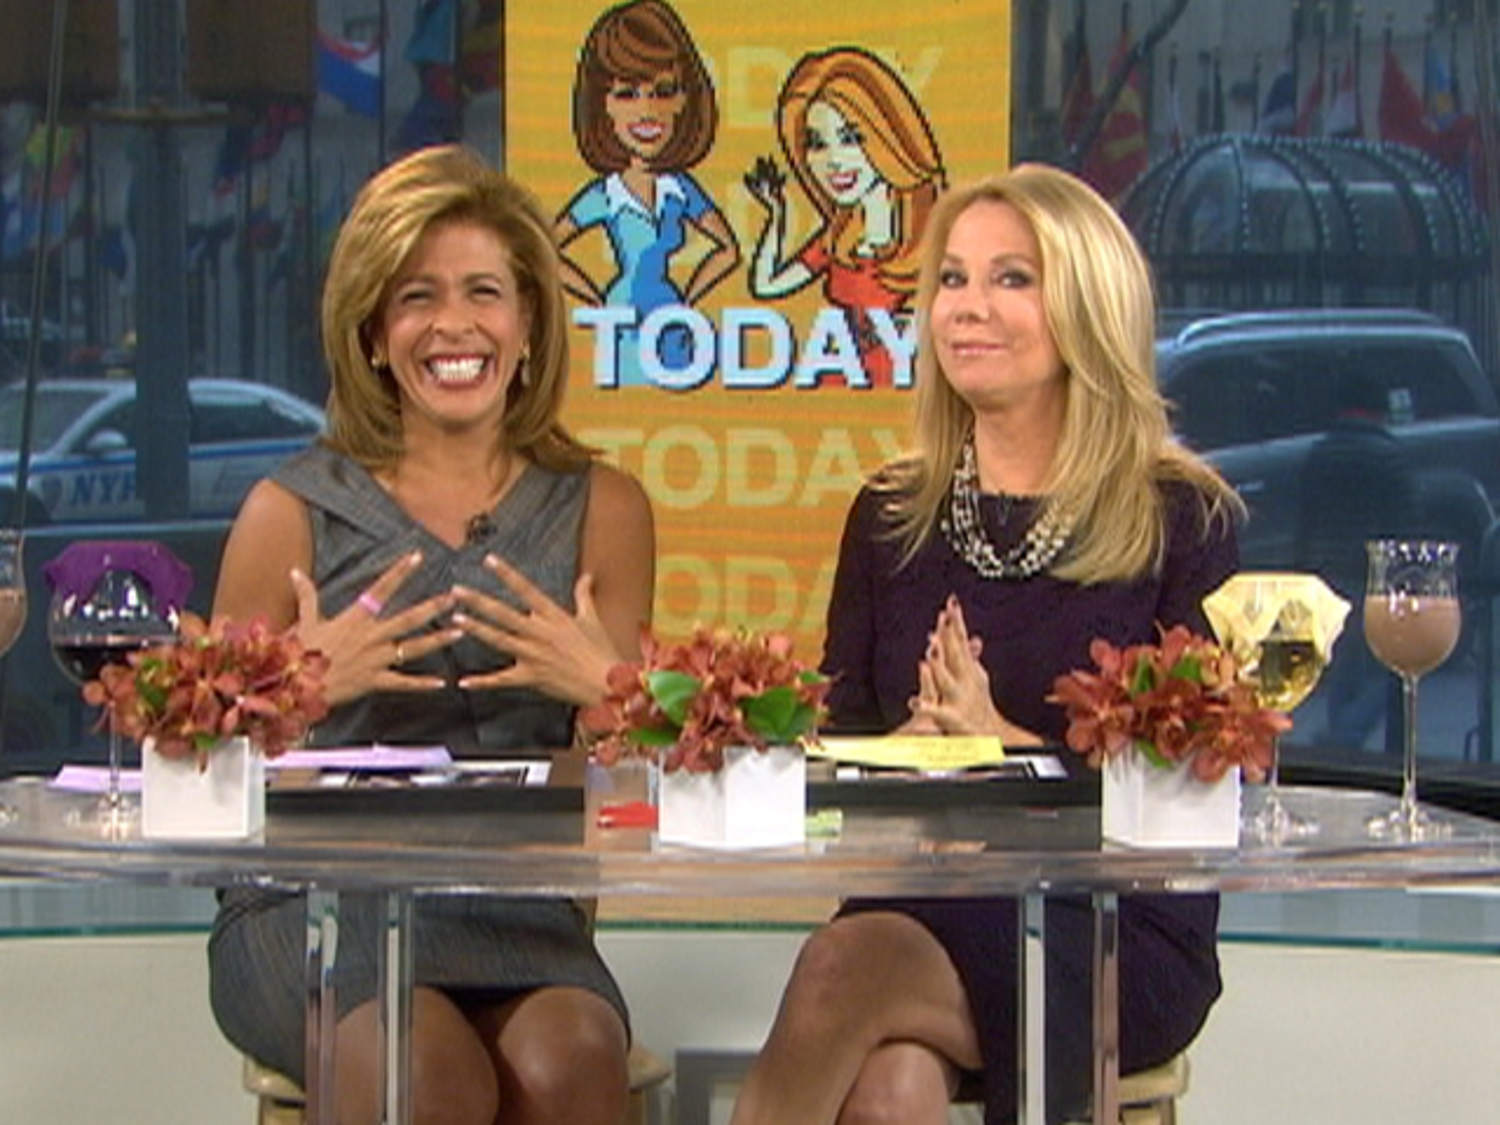 Kathie Lee, Hoda 'bust' up over breasts